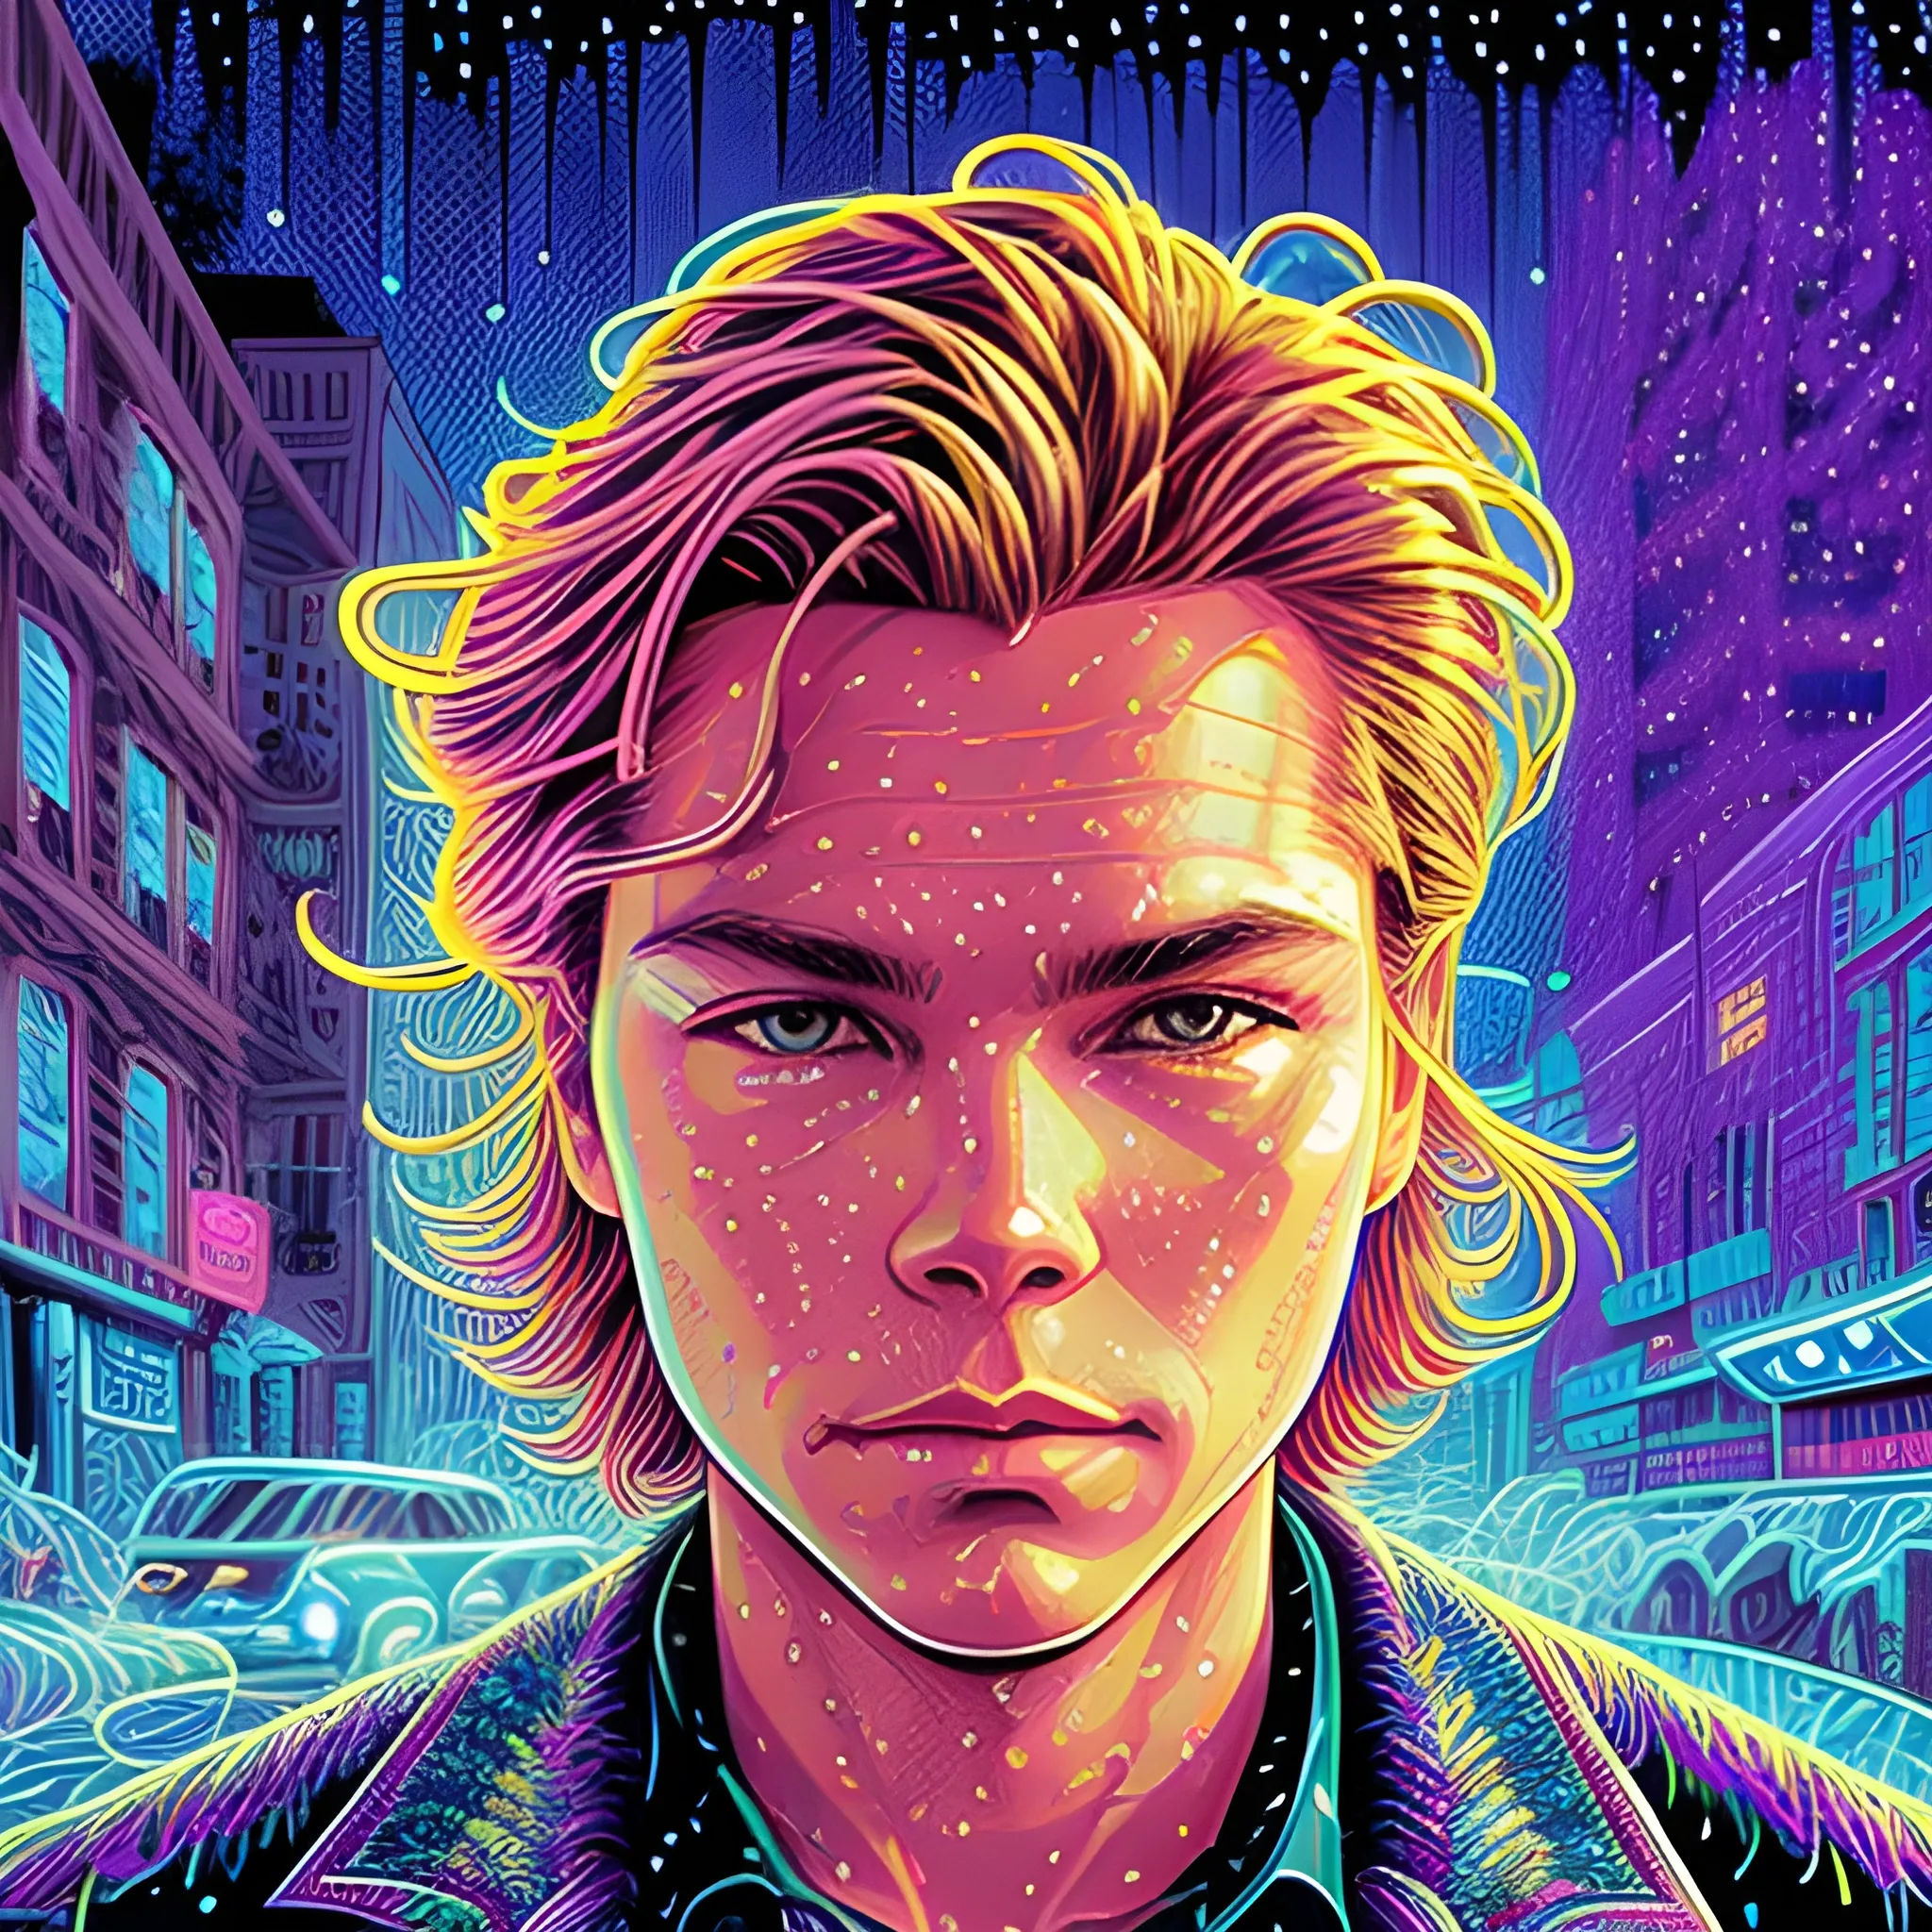 River Phoenix, his highly detailed angular handsome face, meticulously detailed long blond hair; by James R. Eads, Fausto-Giurescu, Tania Rivilis, Dan Mumford; luminous colorful sparkles, glitter, airbrush, depth of field, volumetric lighting, rockstar